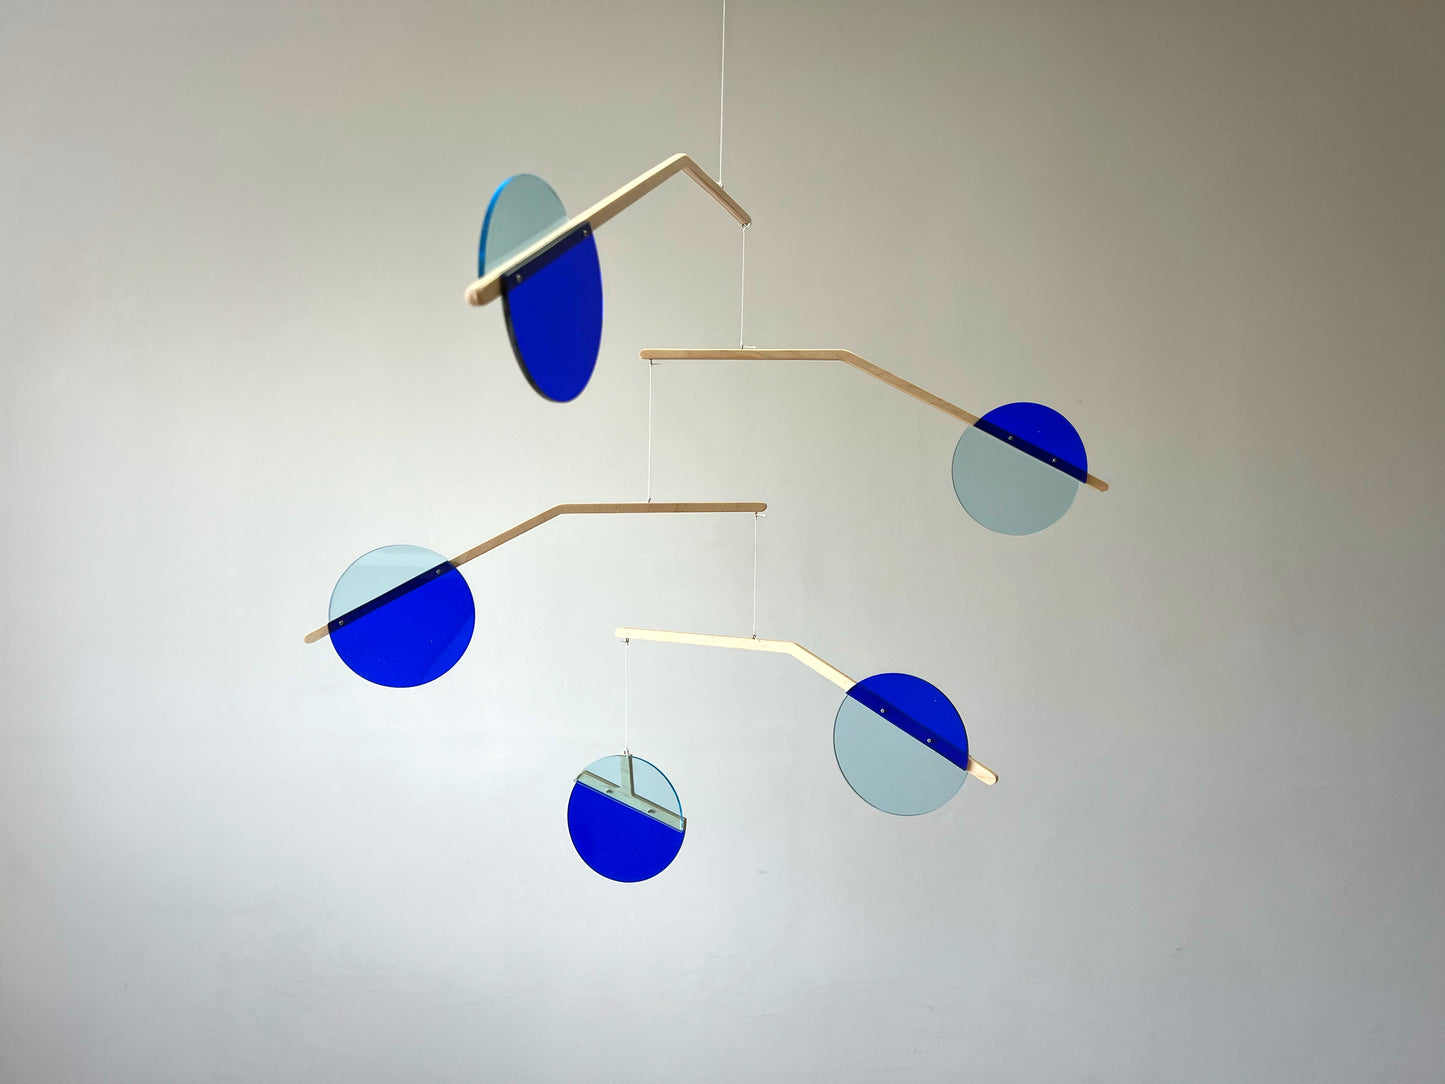 Prism Hanging Kinetic Mobile - Mobiles Kinetic Mobile Kinetic Art  Kinetic Sculpture Crib Mobile Baby Mobile Nursery Mobile Mobile Art Mid Century Art  Mid Century modern Calder mobile mobiles for adults furniture and decor